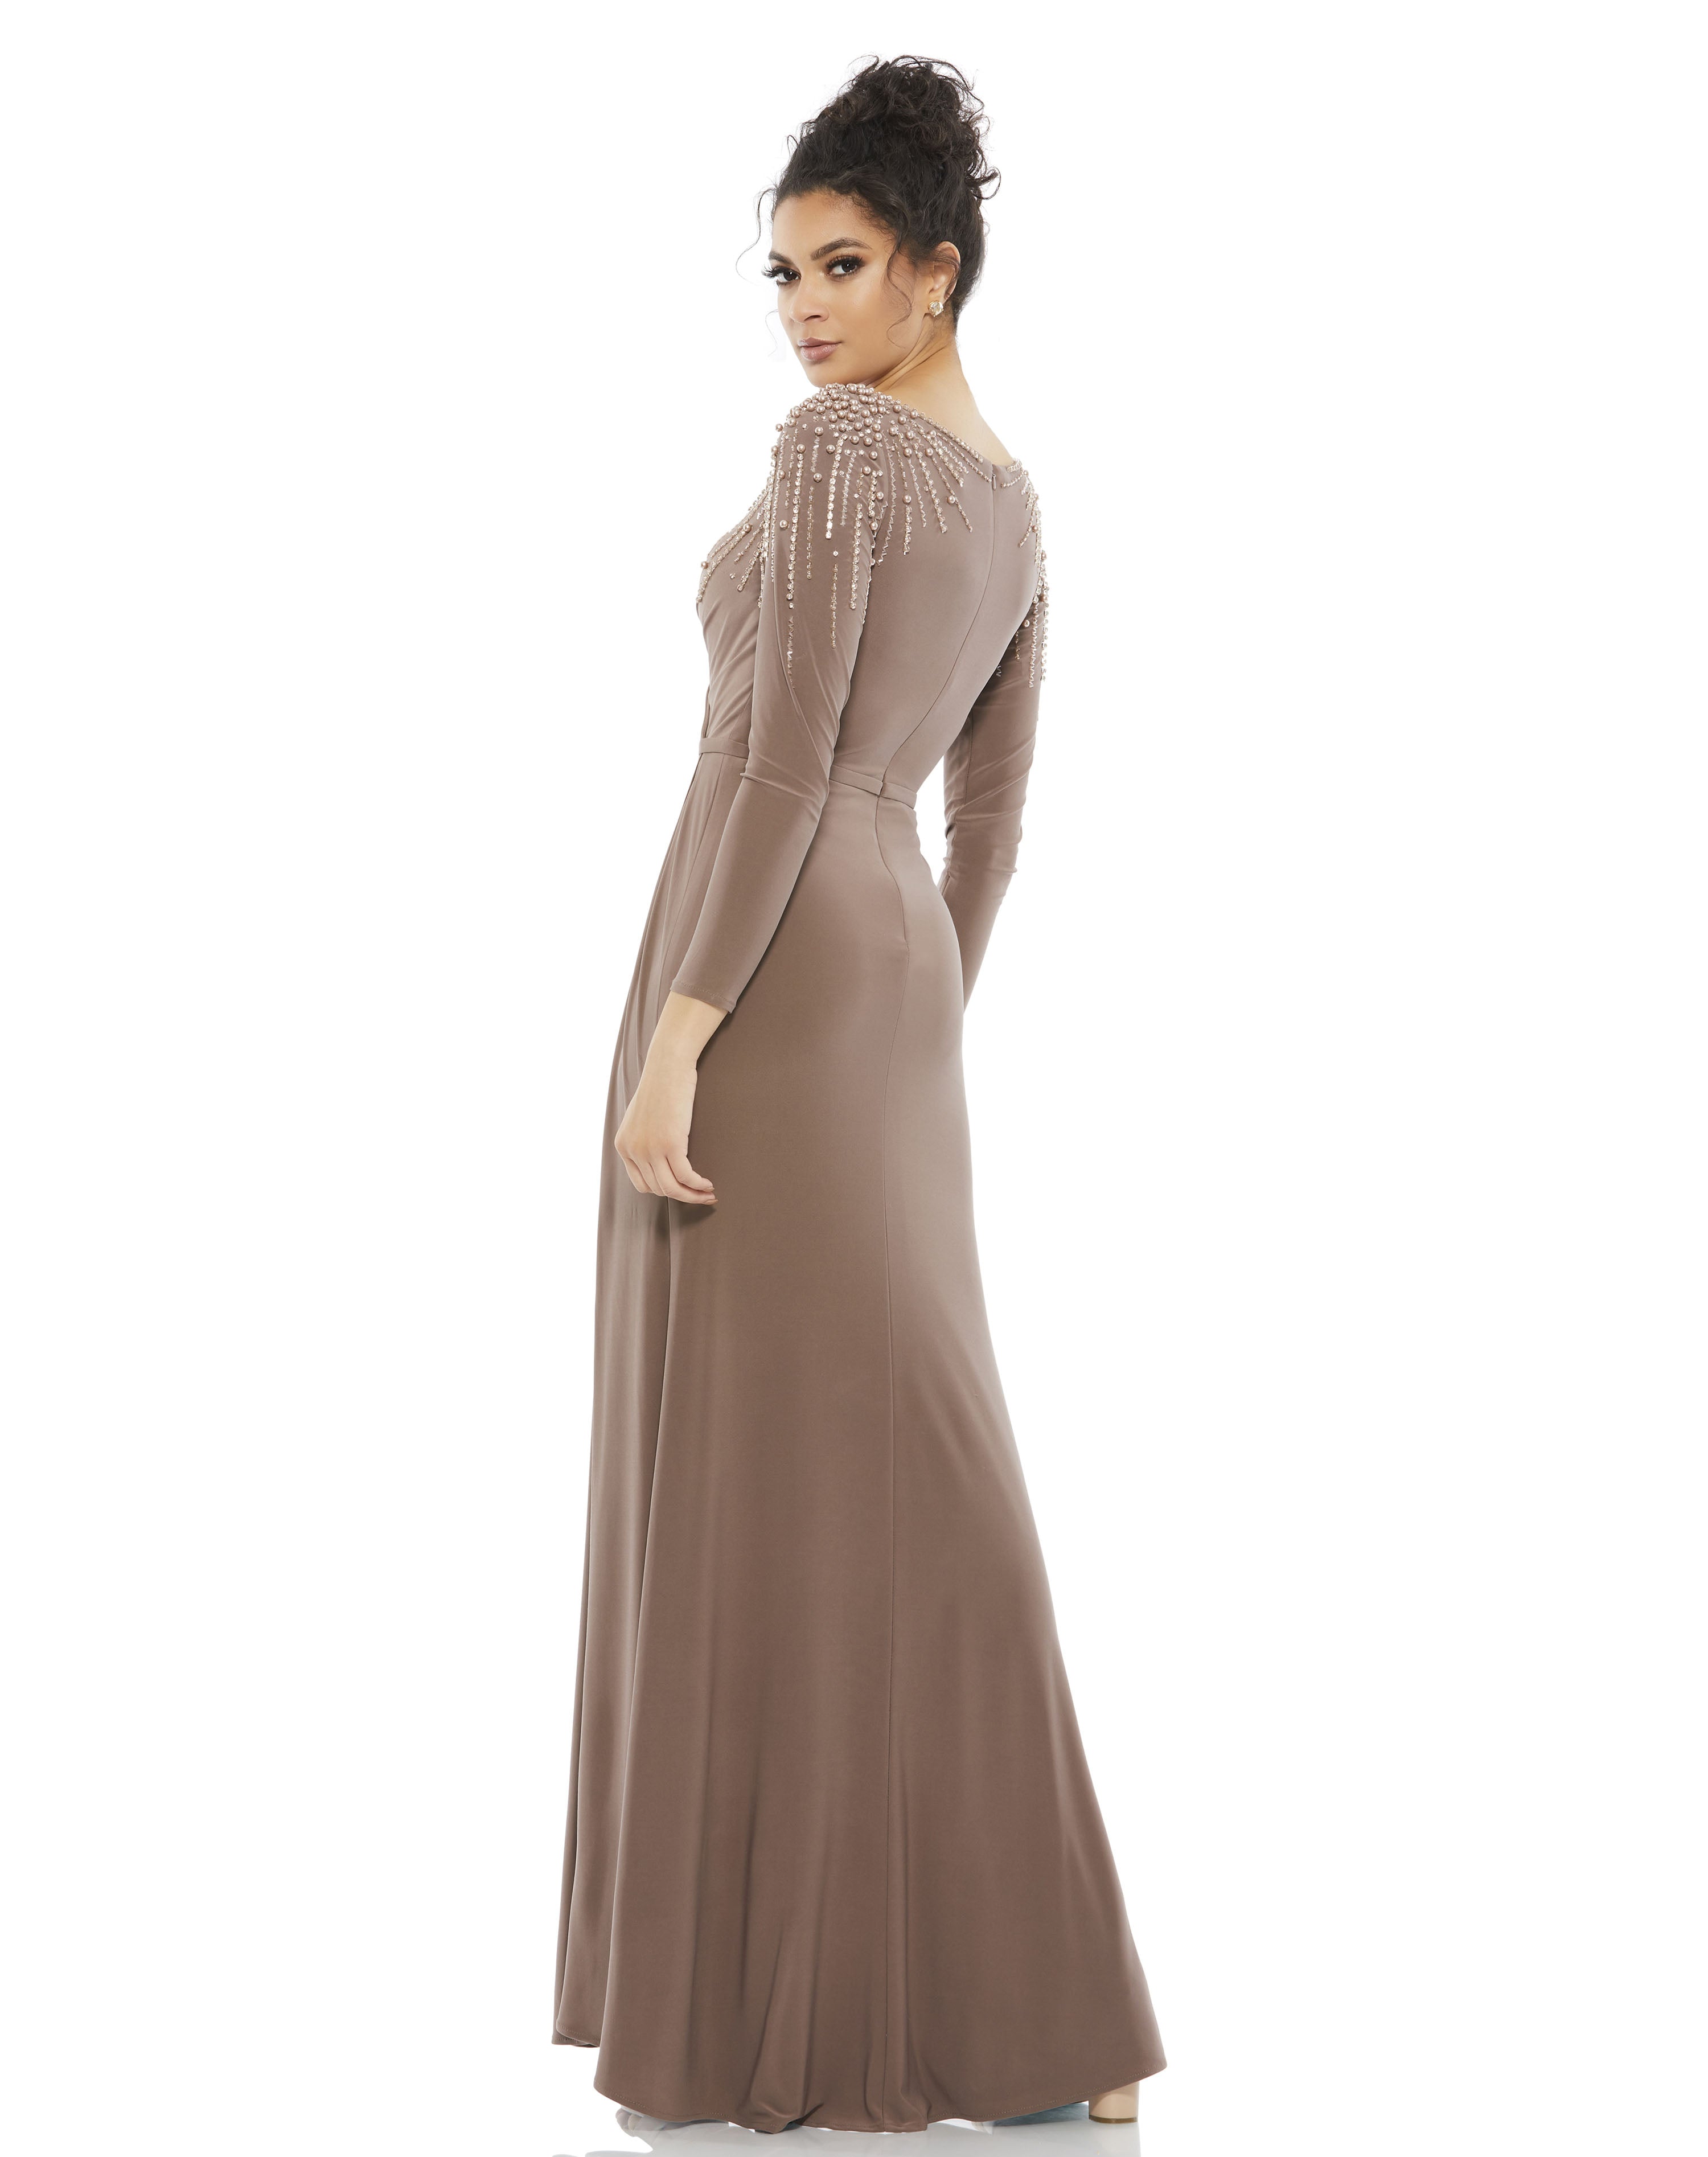 Faux Wrap Jersey Gown w/ Embellished Accents